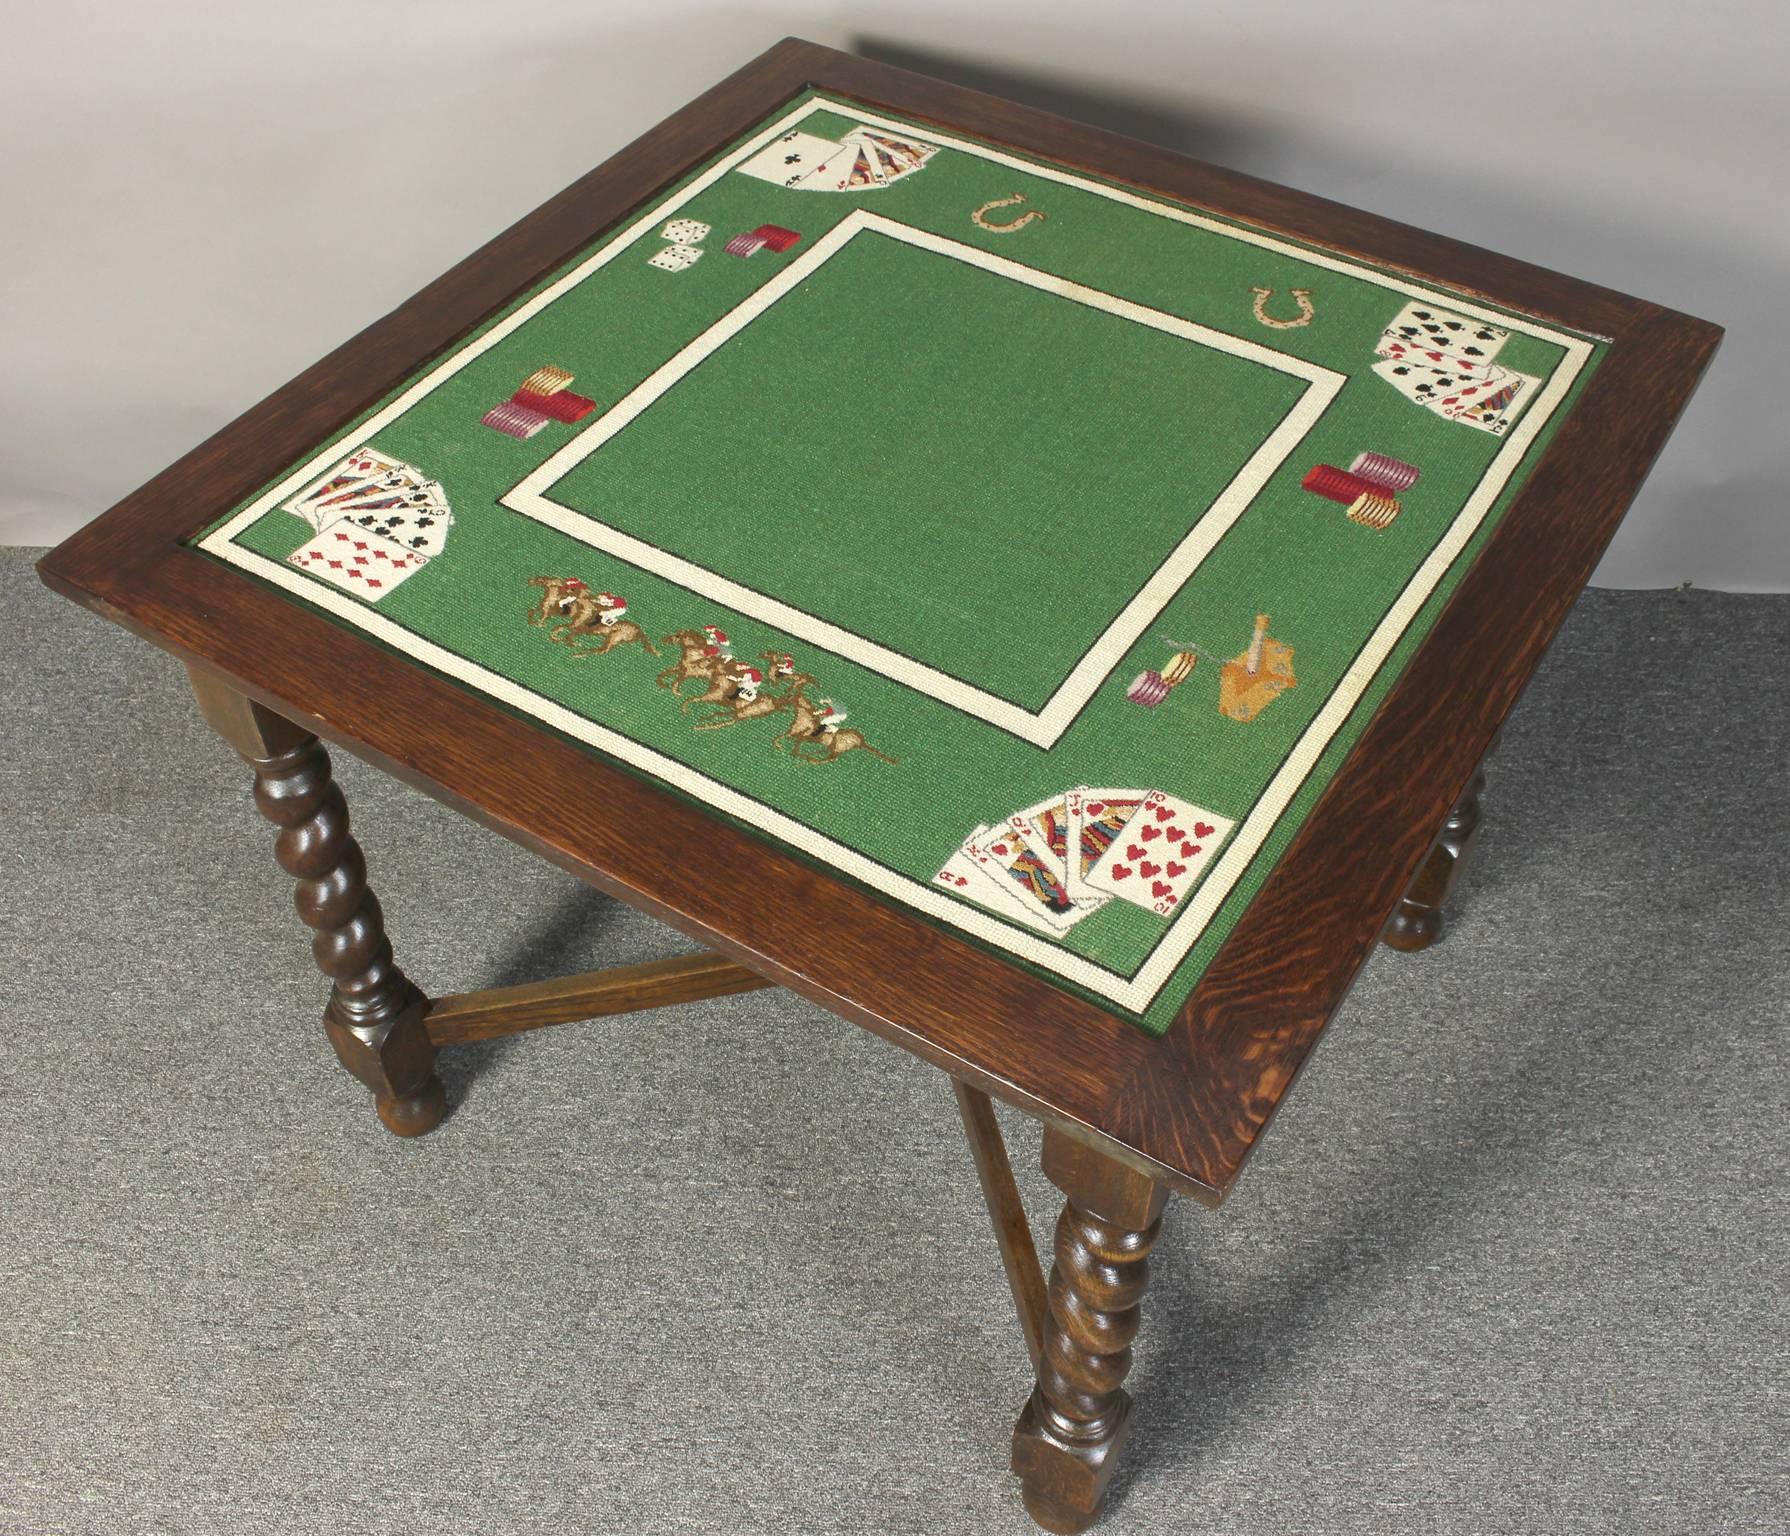 A charming mid-20th century English oak games or card table with wonderful needlepoint playing surface supported on thick barley twist legs.